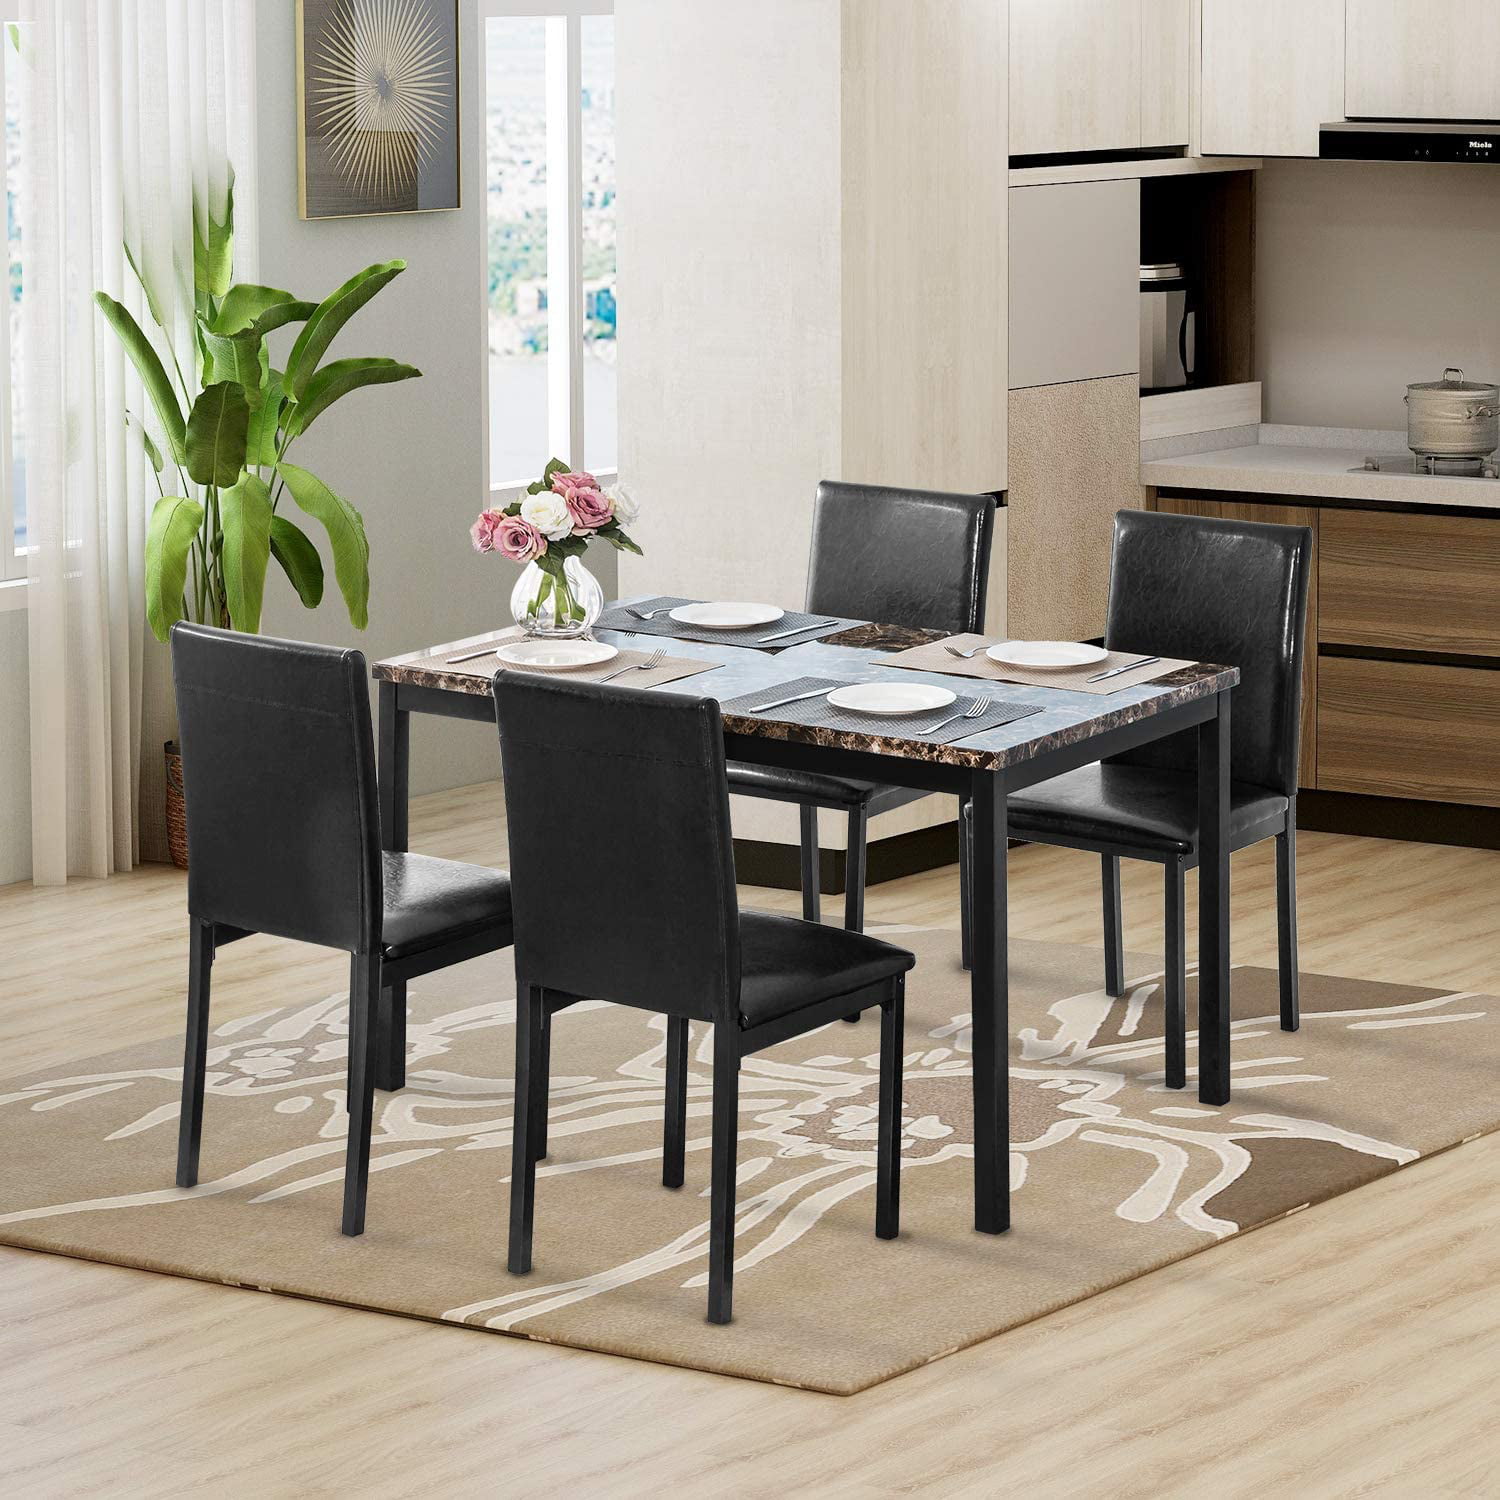 Kitchen Dining Table Set For 4 Faux, Dining Room Table Upholstered Chairs